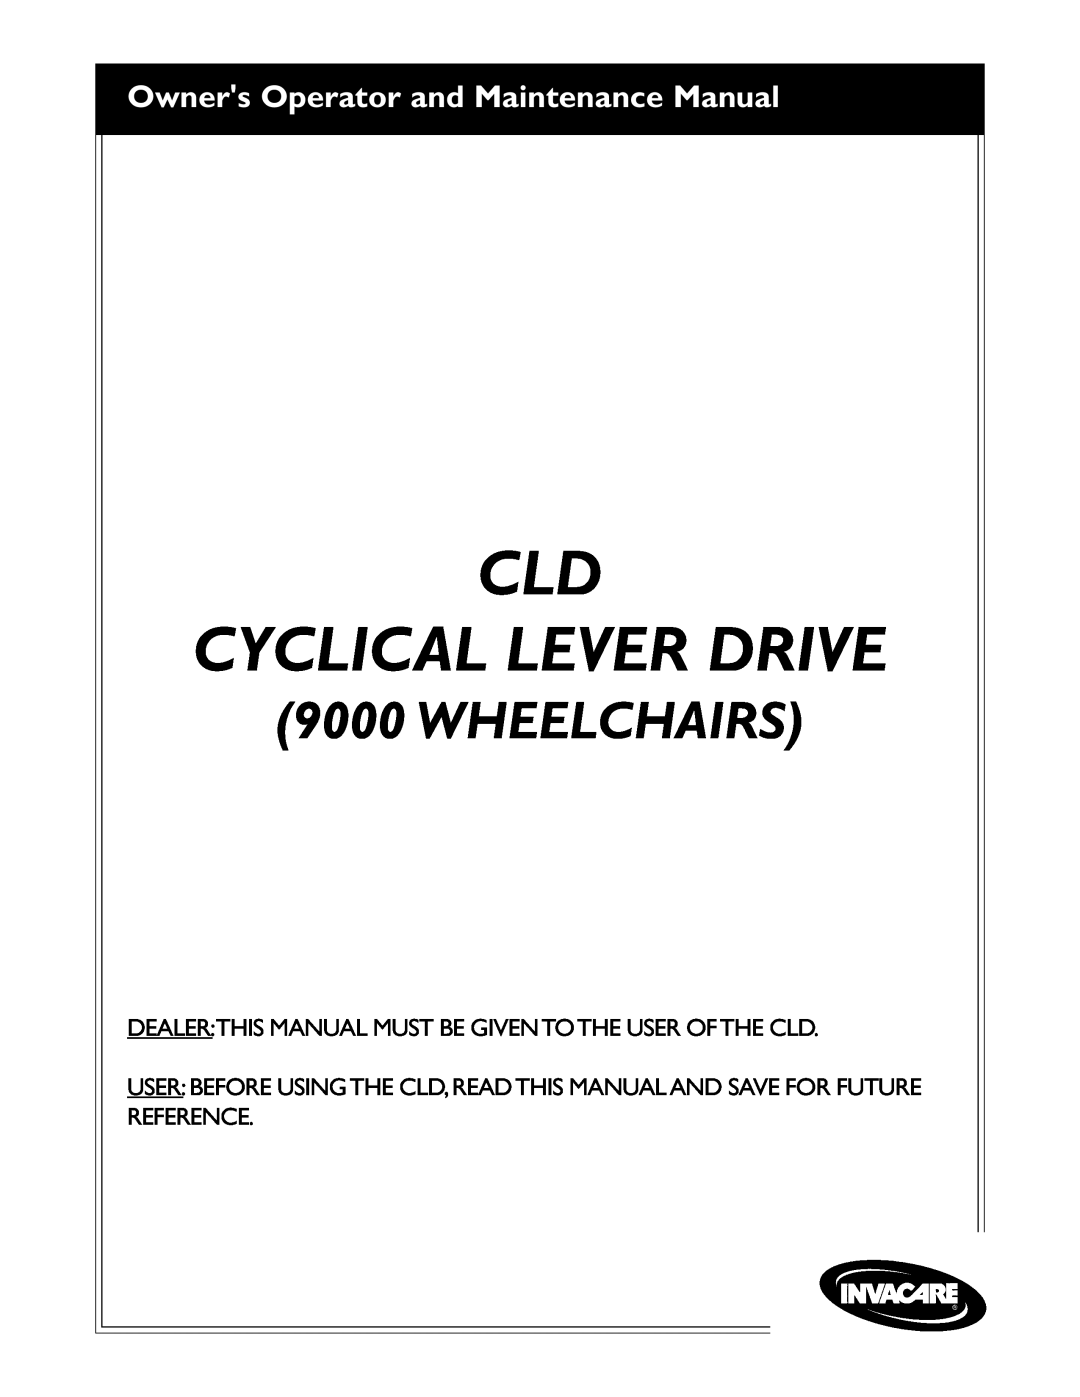 Invacare 9000 Wheelchairs manual Cld Cyclical Lever Drive, Owners Operator and Maintenance Manual 